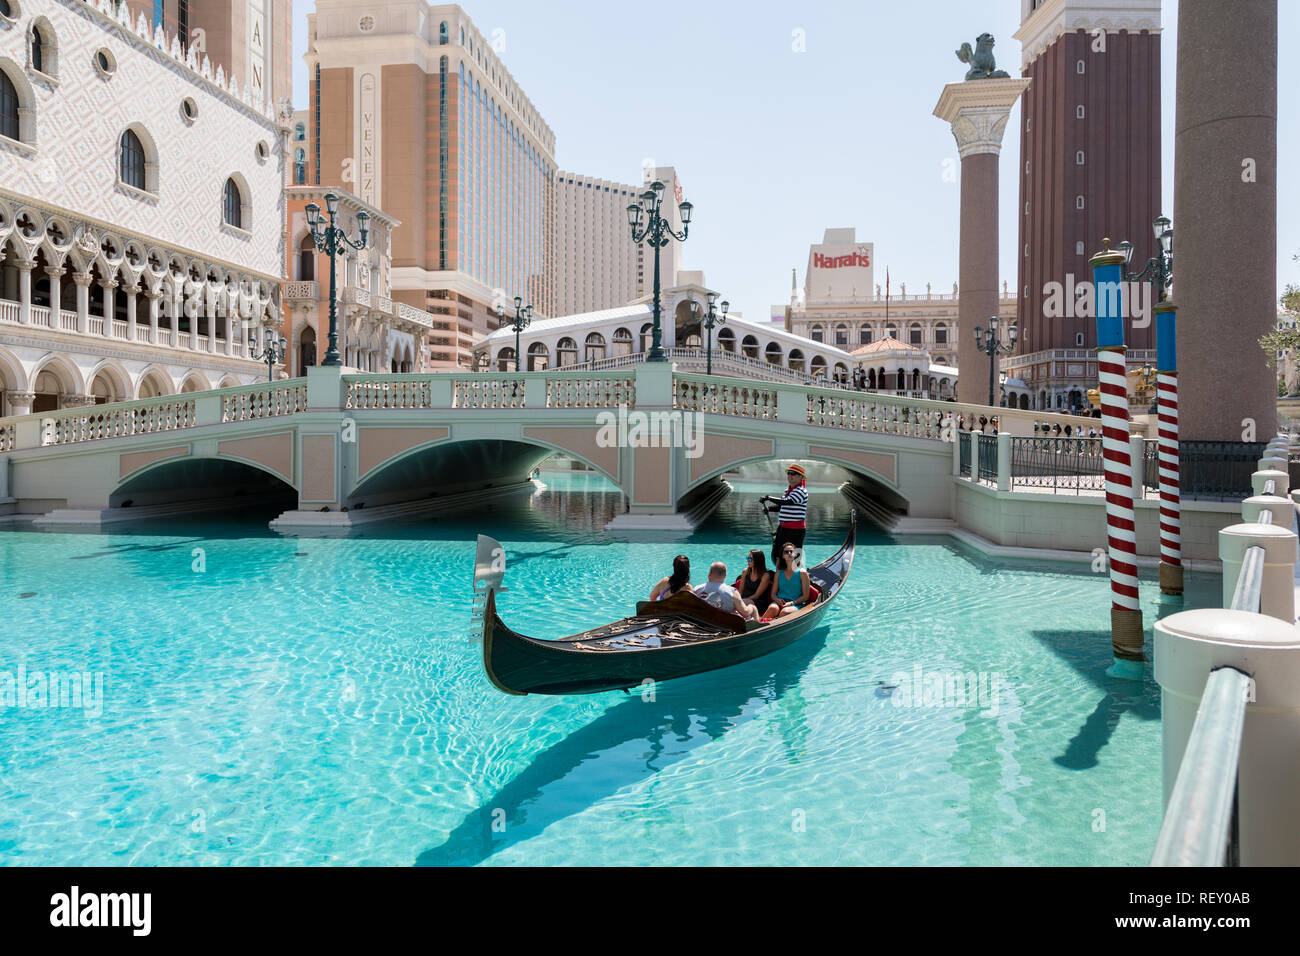 Las Vegas, Nevada, USA - September 1, 2017: Tourists enjoying ride in gondola at Grand Canal by the bridge at The Venetian Resort Hotel and Casino.  T Stock Photo